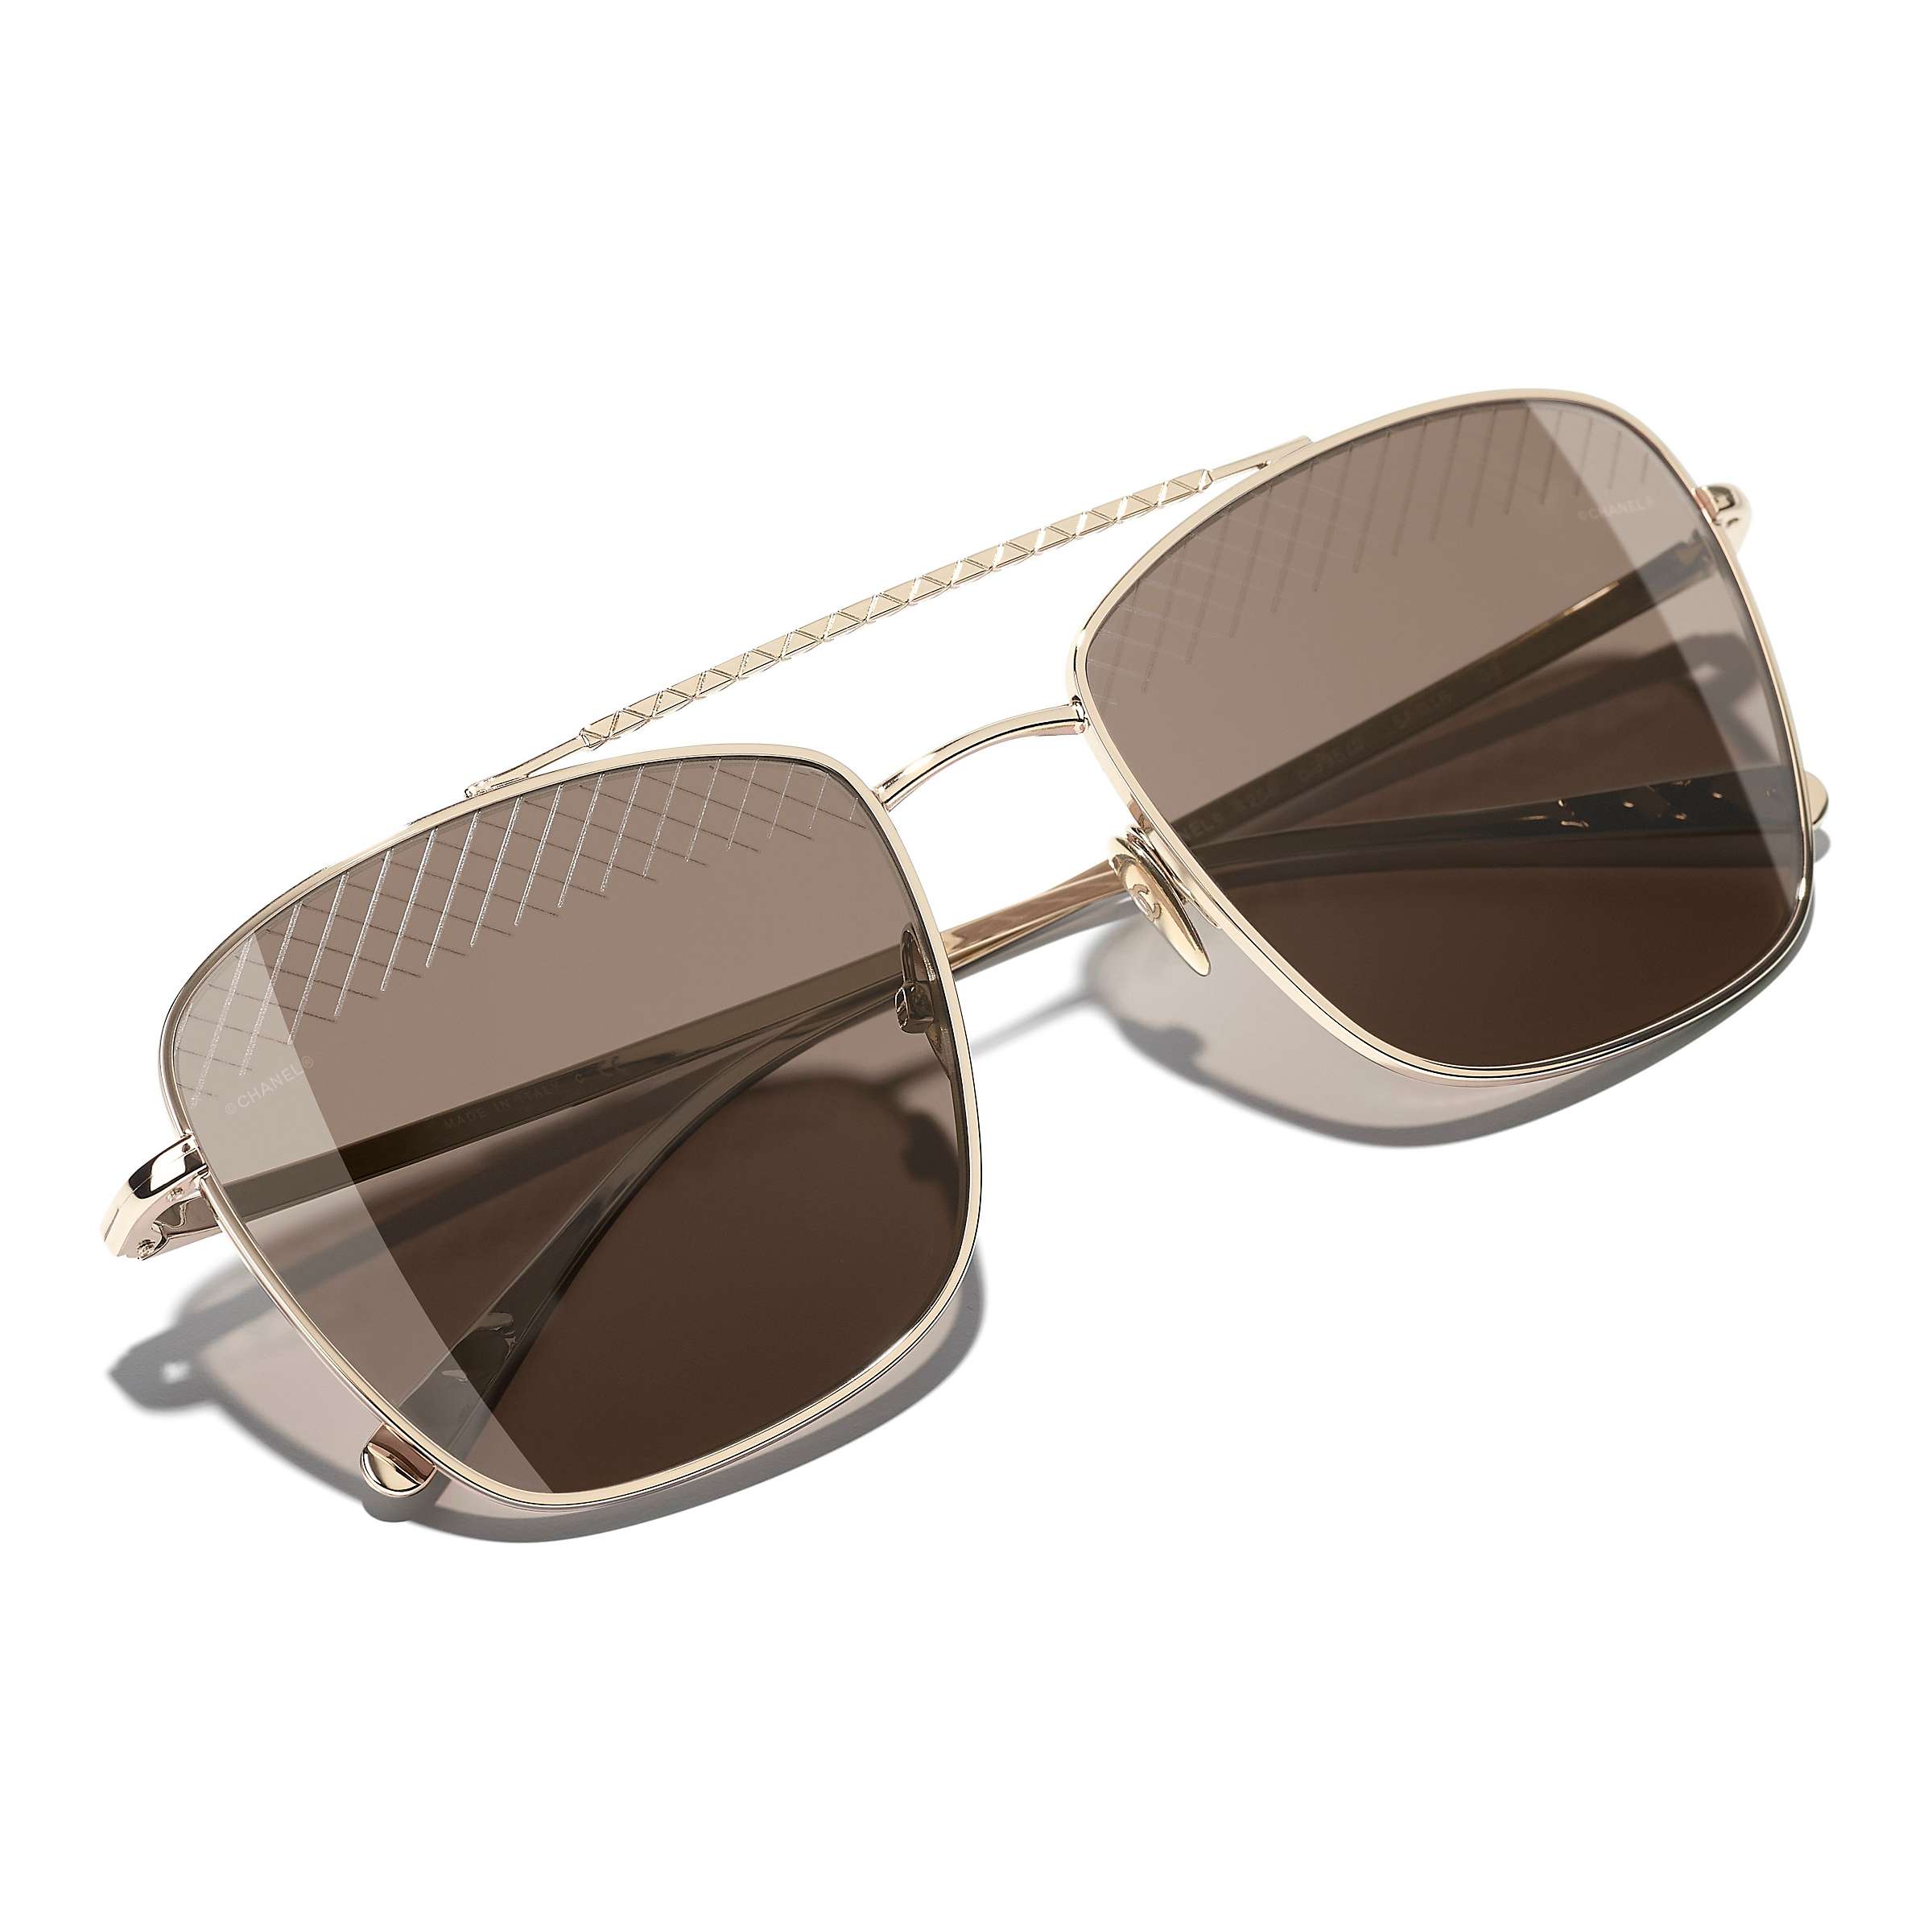 Buy CHANEL Pilot Sunglasses CH4256 Gold/Brown Online at johnlewis.com